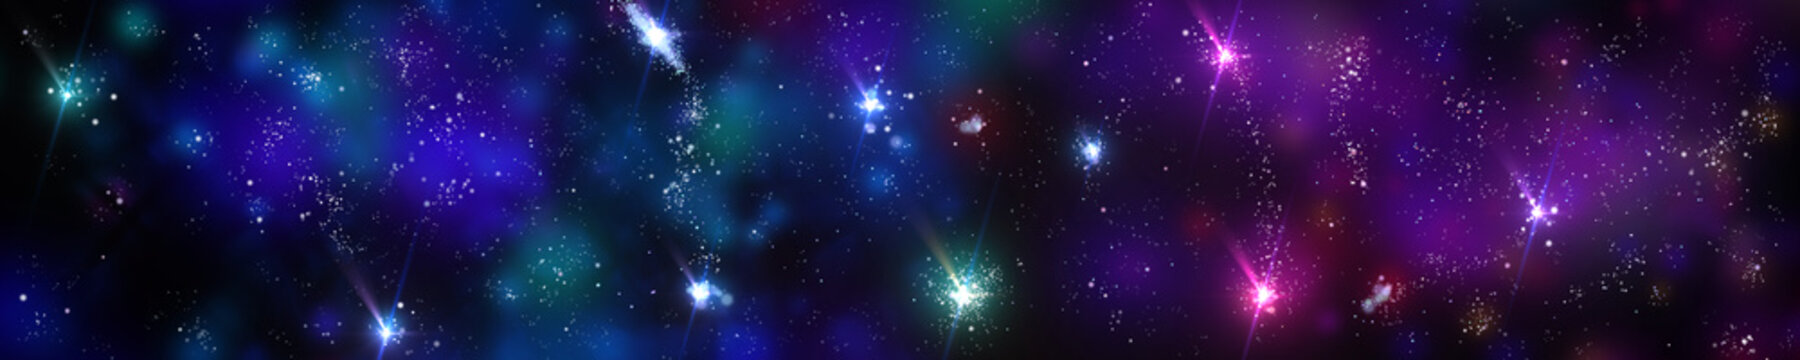 Panorama of the universe, star clusters, banner